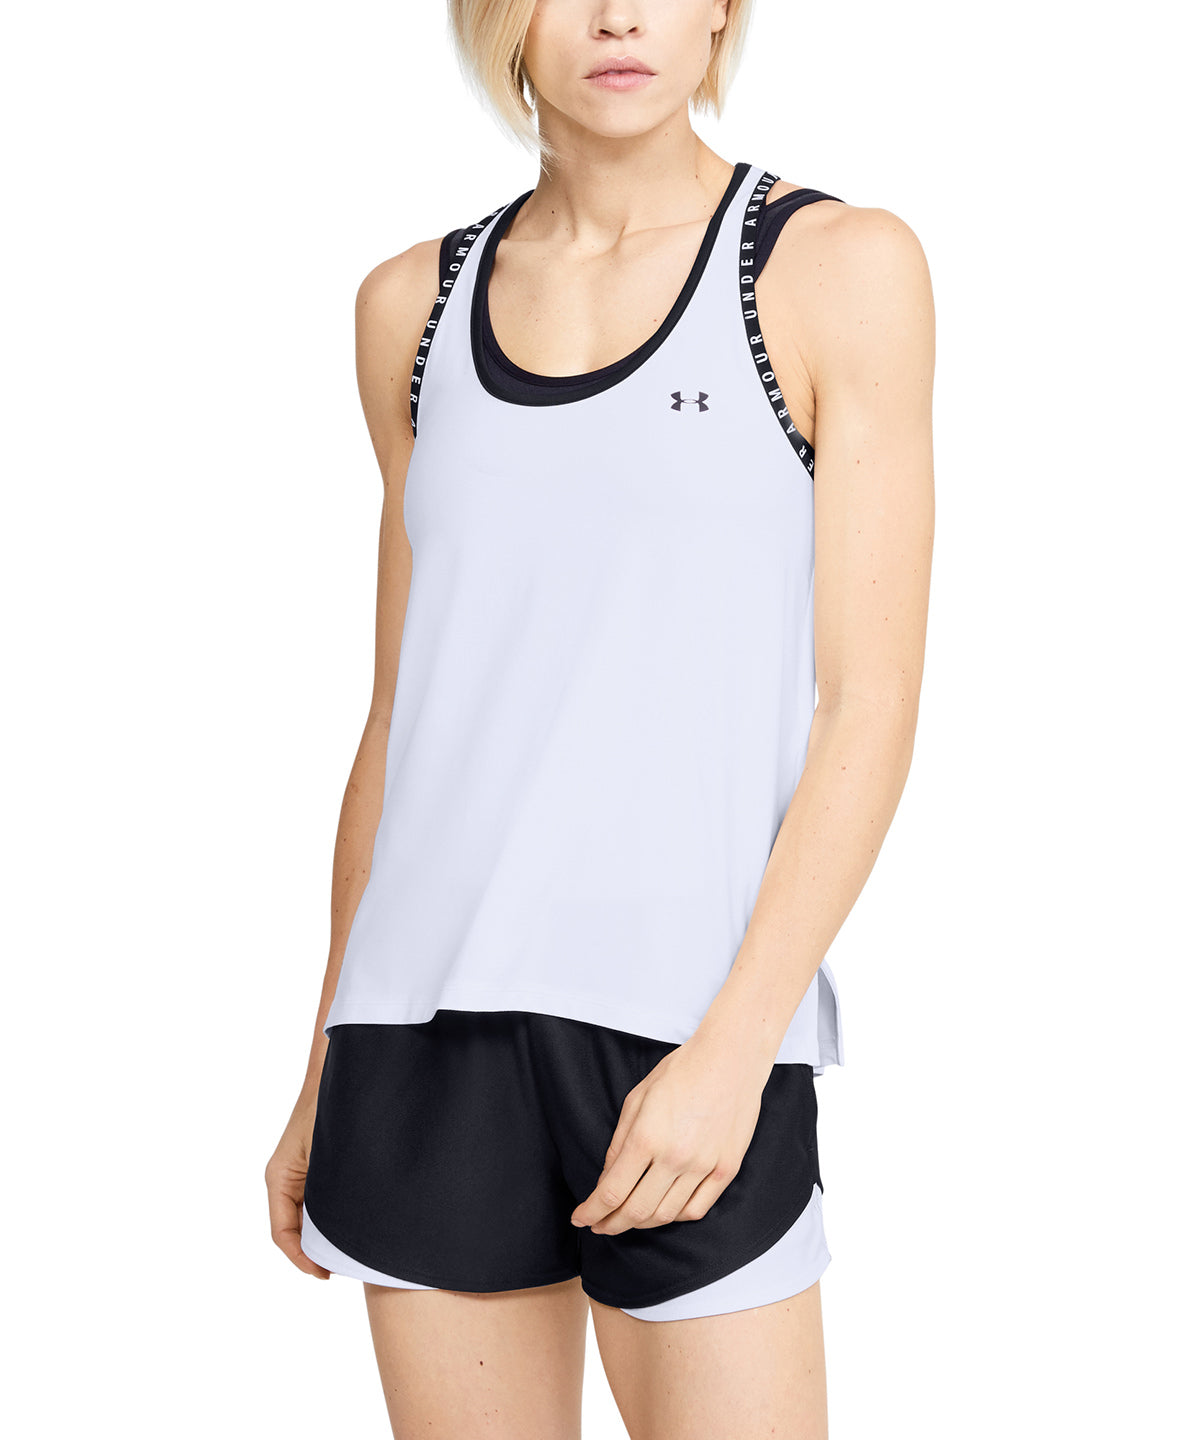 under armour Women's knockout gym tank